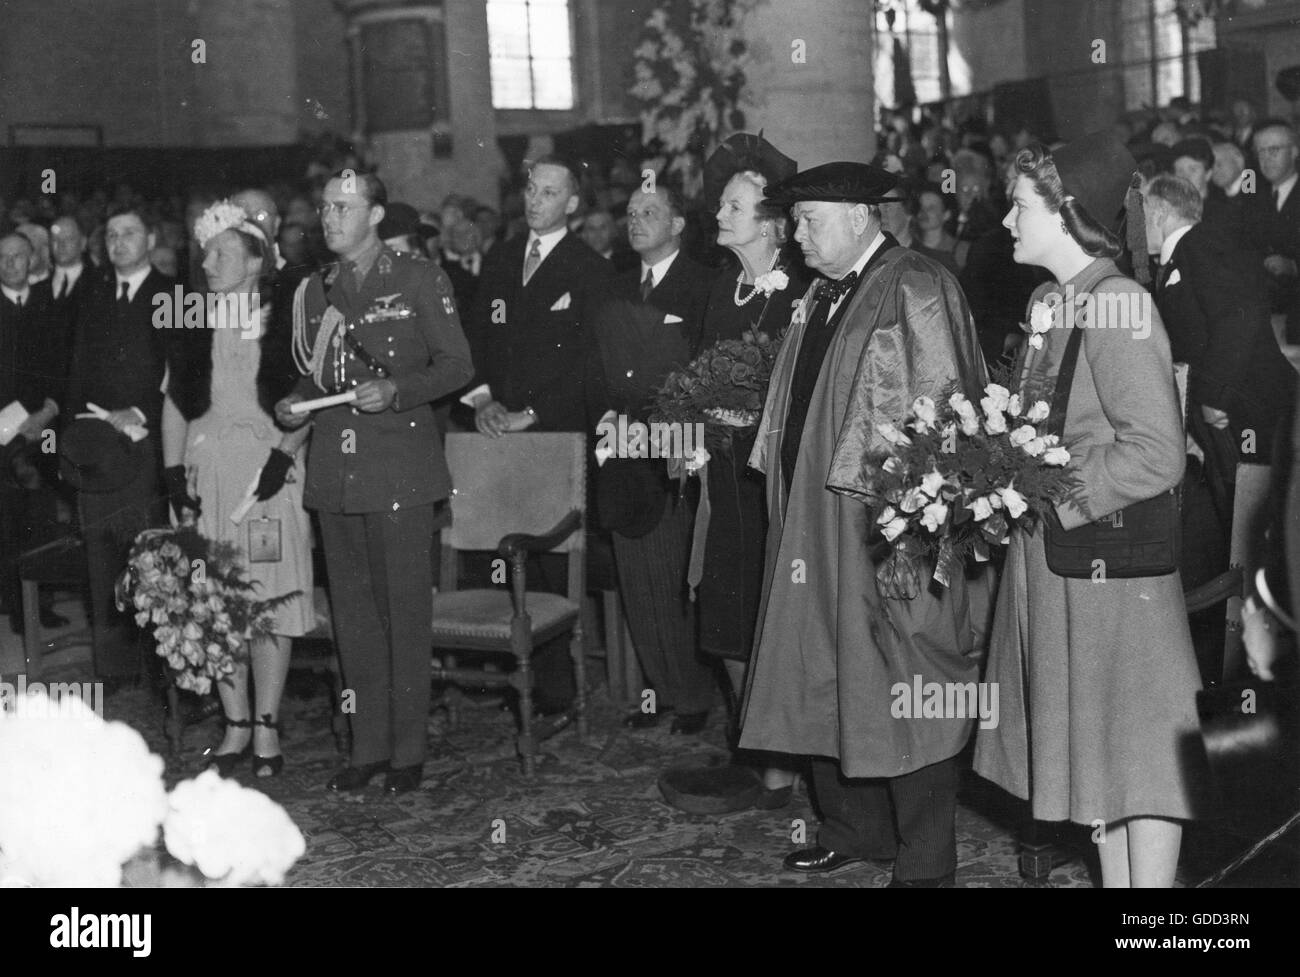 Churchill, Winston, 30.11.1874 - 24.1.1965, British politician (Cons.), visit to the Netherlands, bestowal with the honorary doctorate of the University of Leiden, ceremony in the Pieterskerk, May 1946, from left: princess Juliana, prince Bernhard, wife Clementine Churchill, Winston Churchill, daughter Mary Churchill, Stock Photo